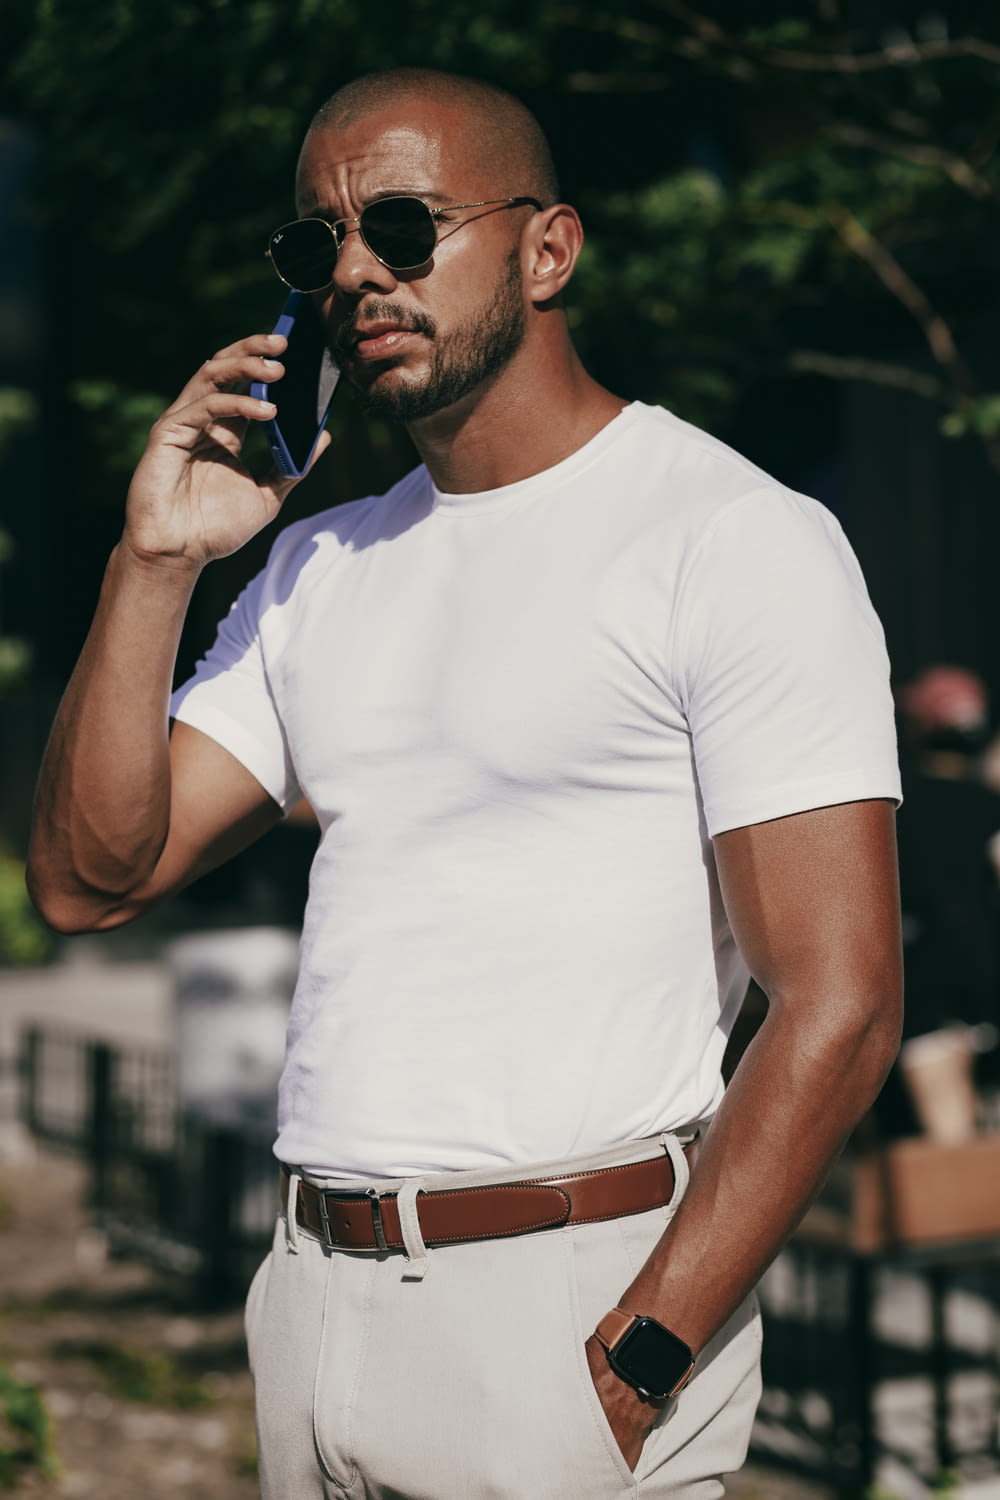 a man wearing sunglasses and holding a phone